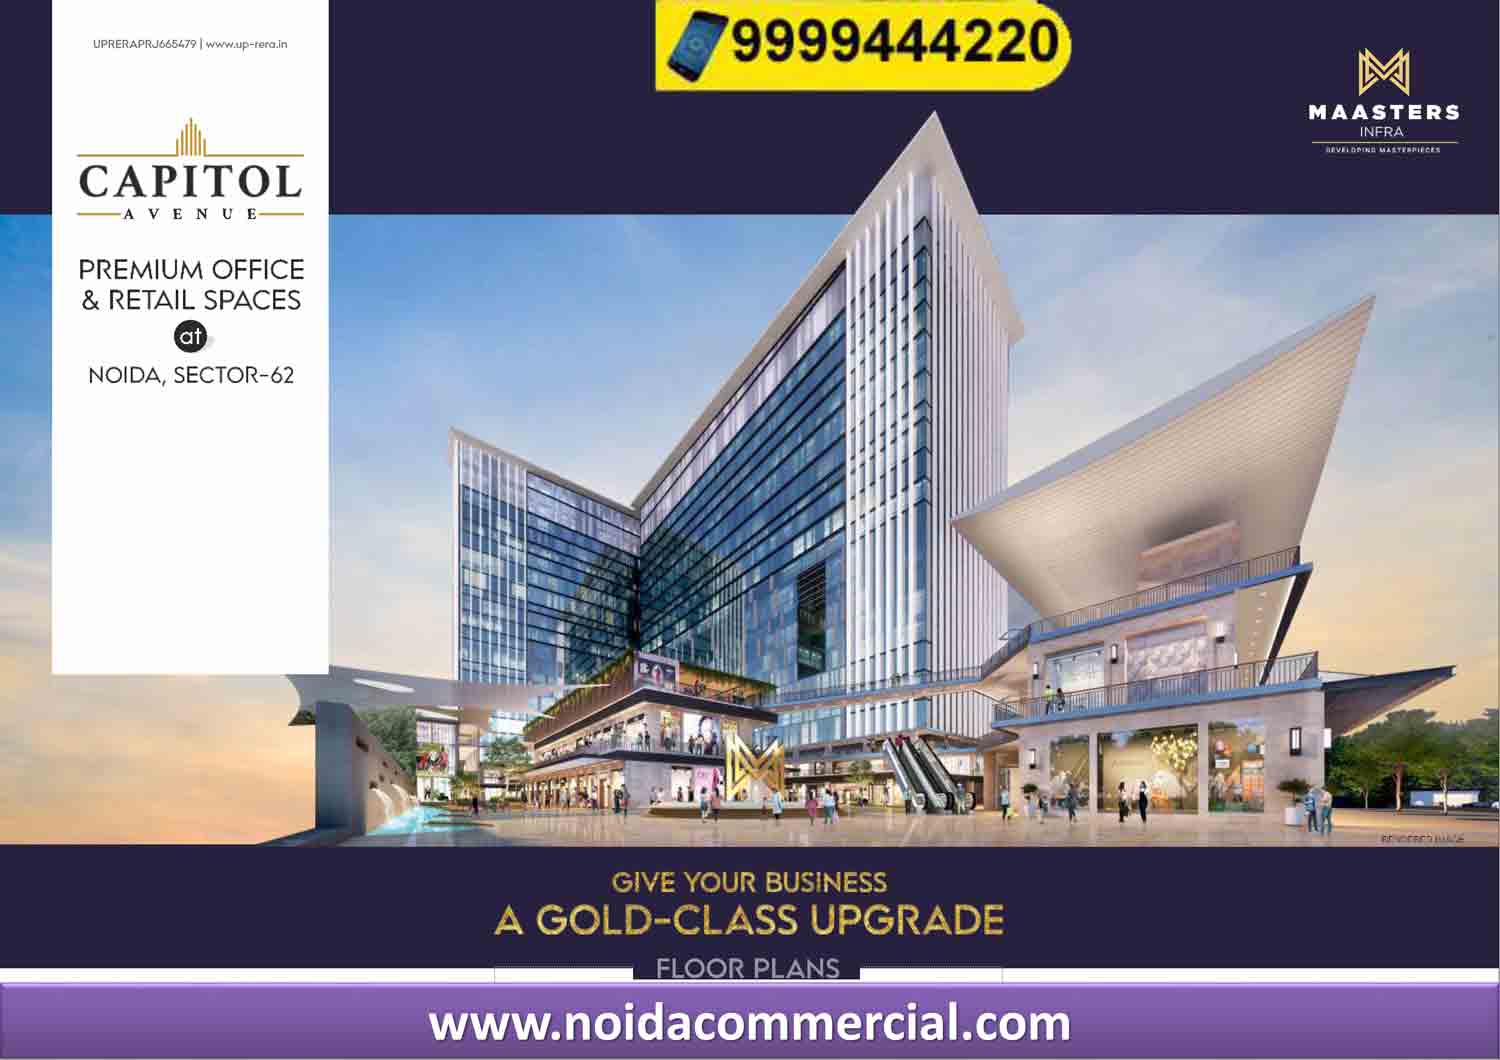 Investing in Noida Expressway Commercial Property in Noida